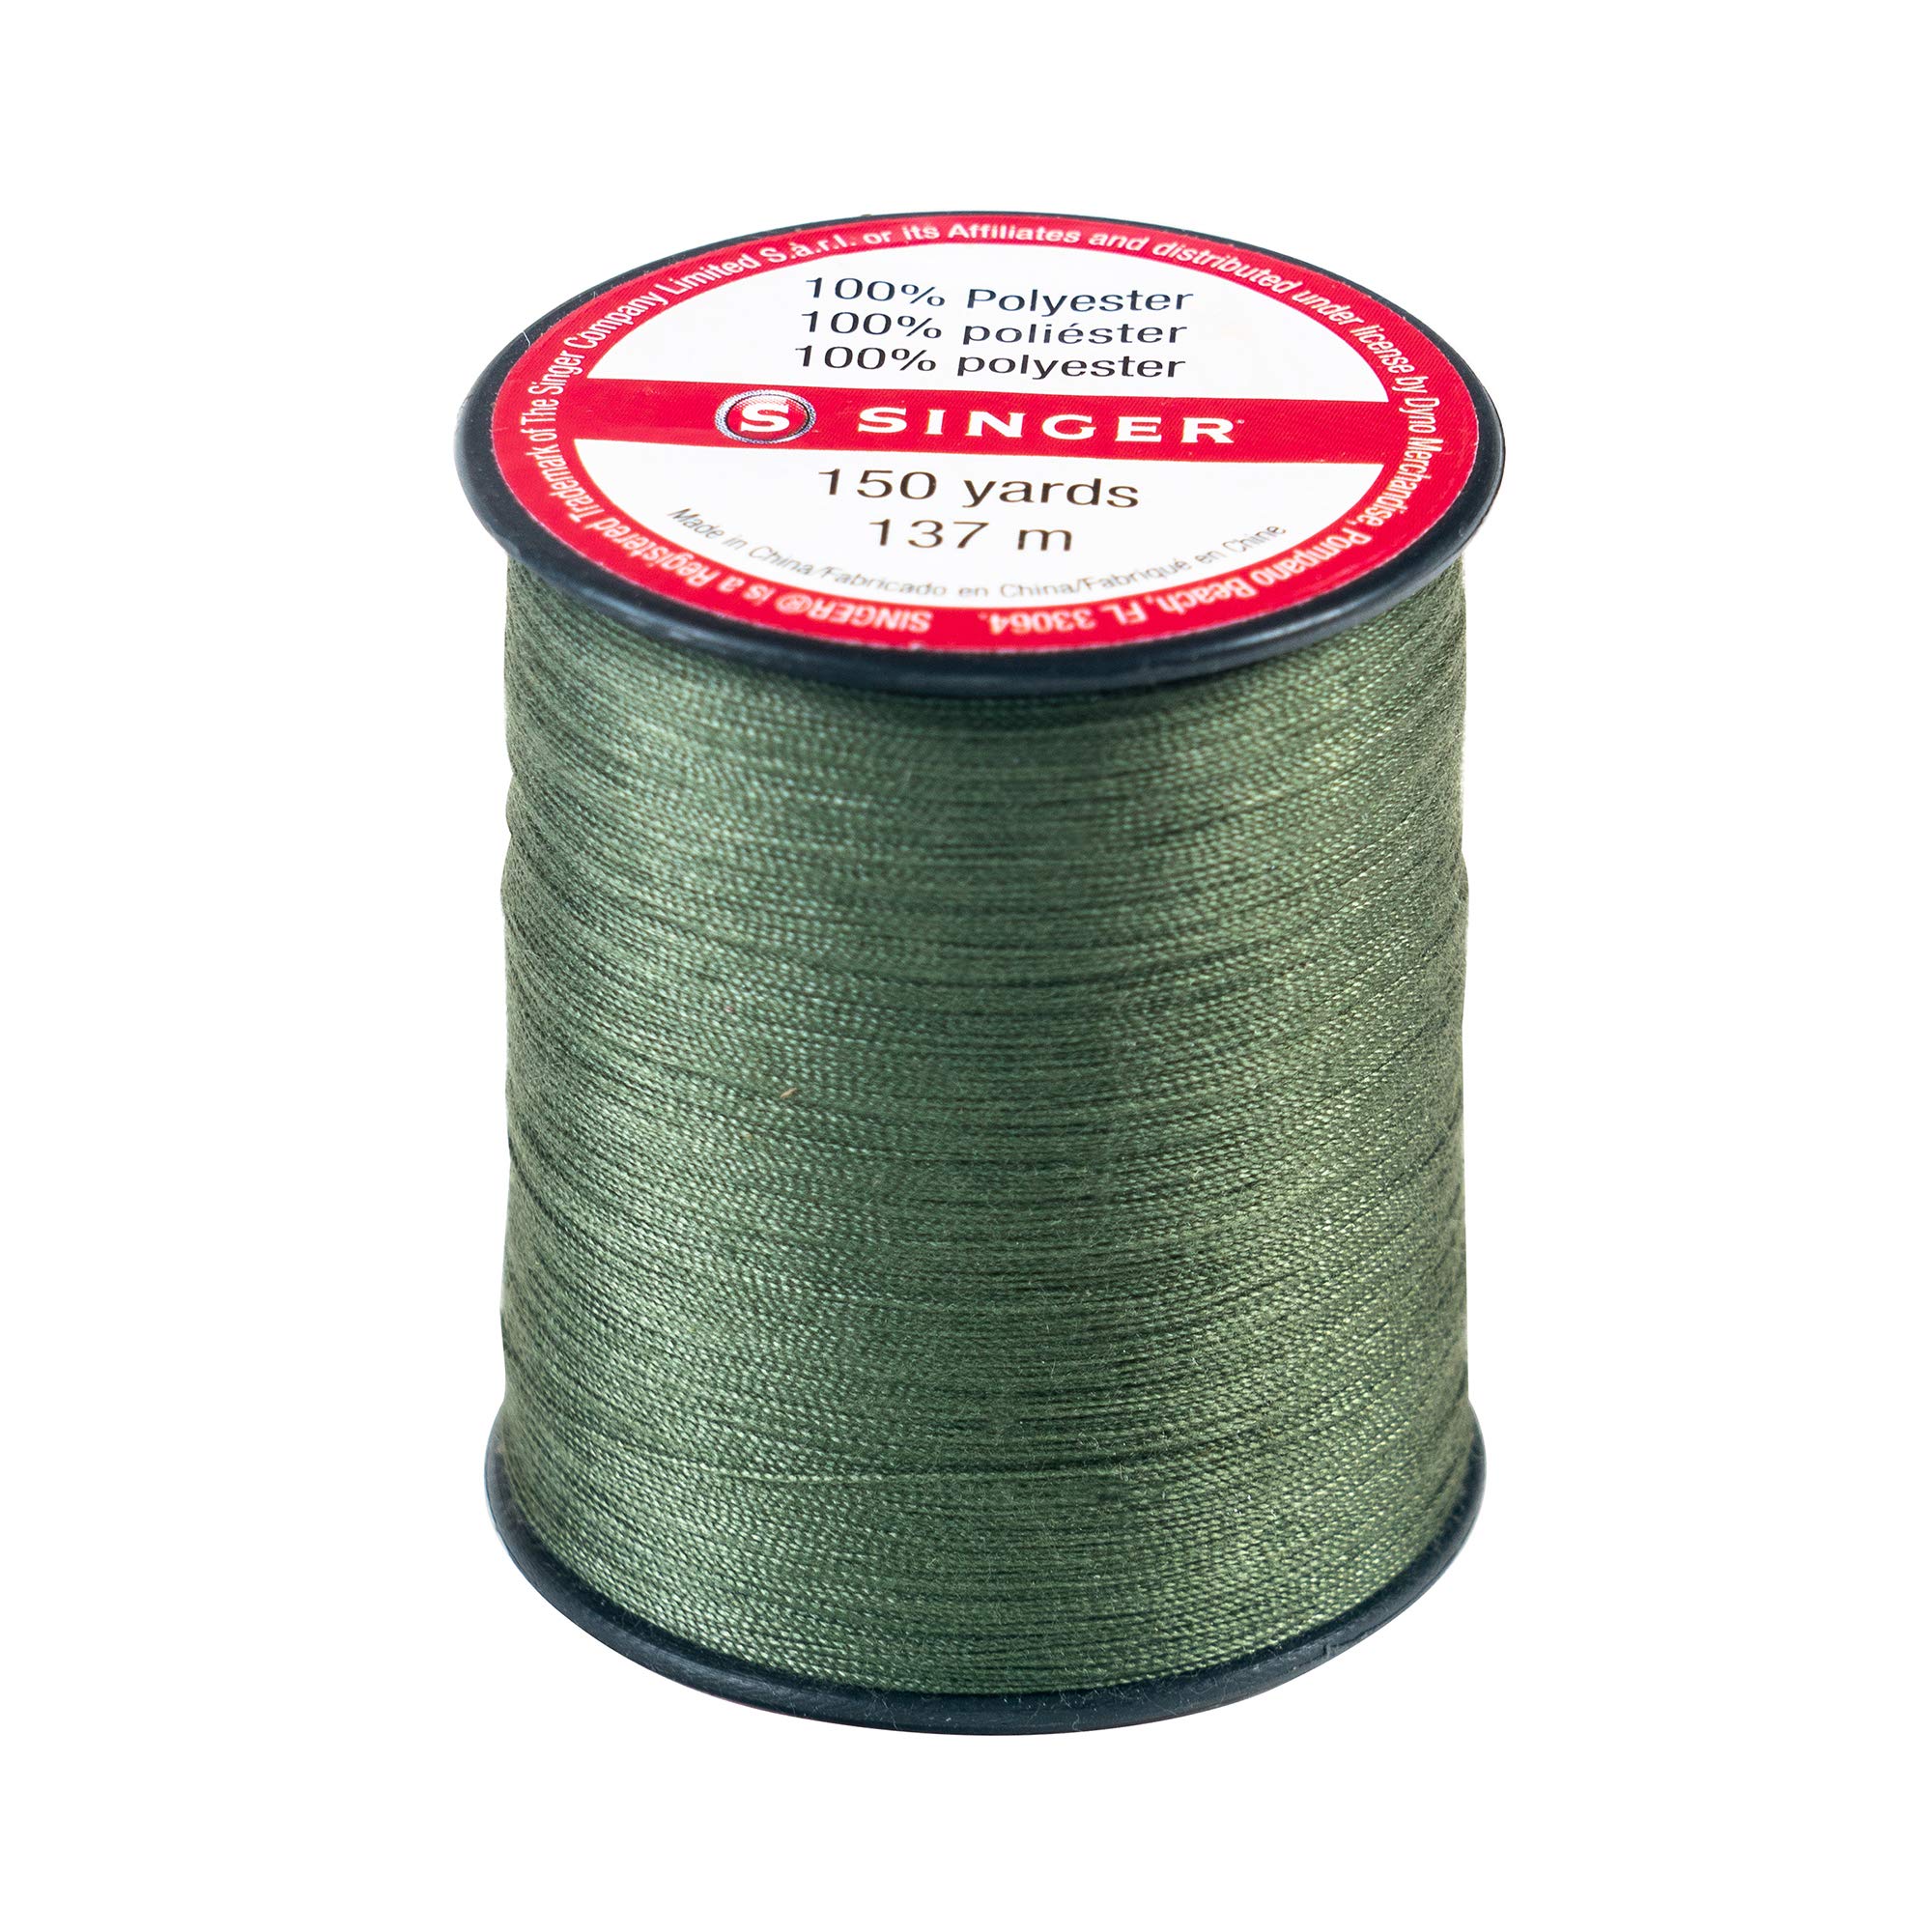 SINGER 60200 All Purpose Polyester Thread, 150-Yard, Olive Green